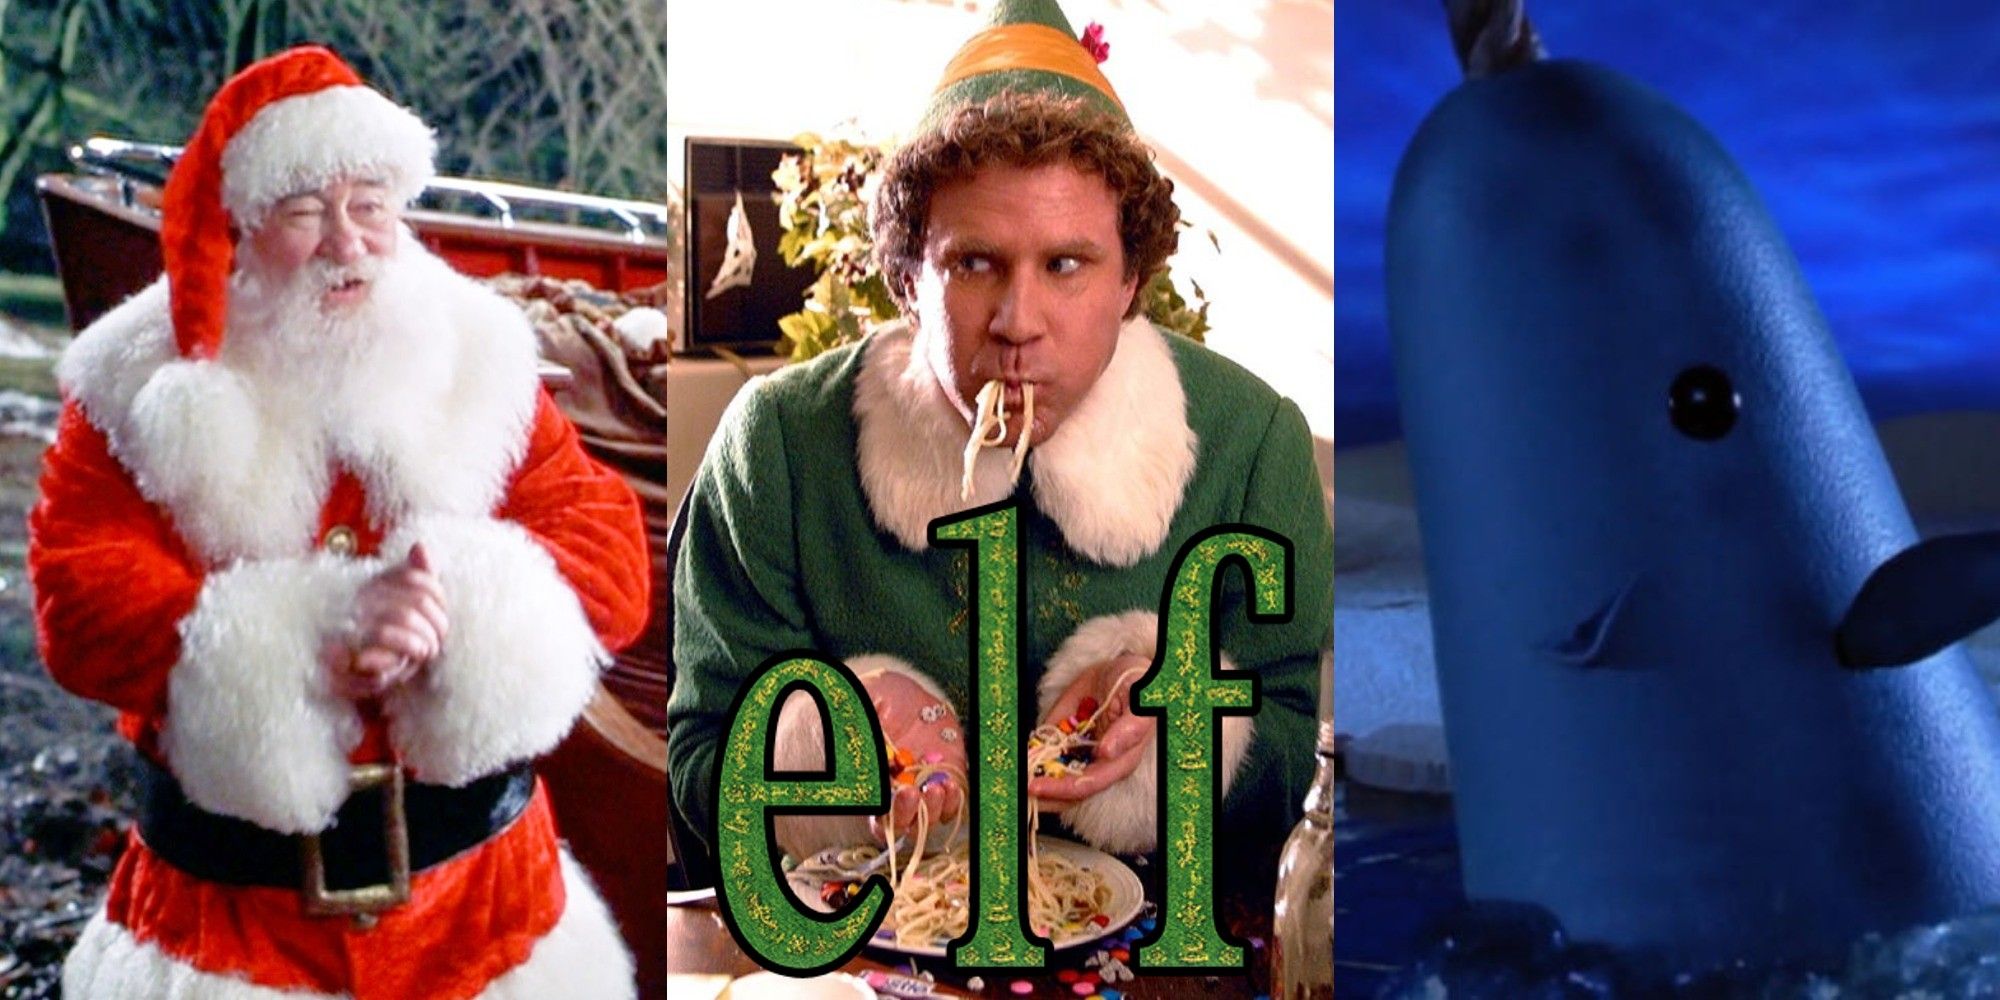 Split image of Santa, Buddy the Elf, and Mr. Narwhal from the movie Elf